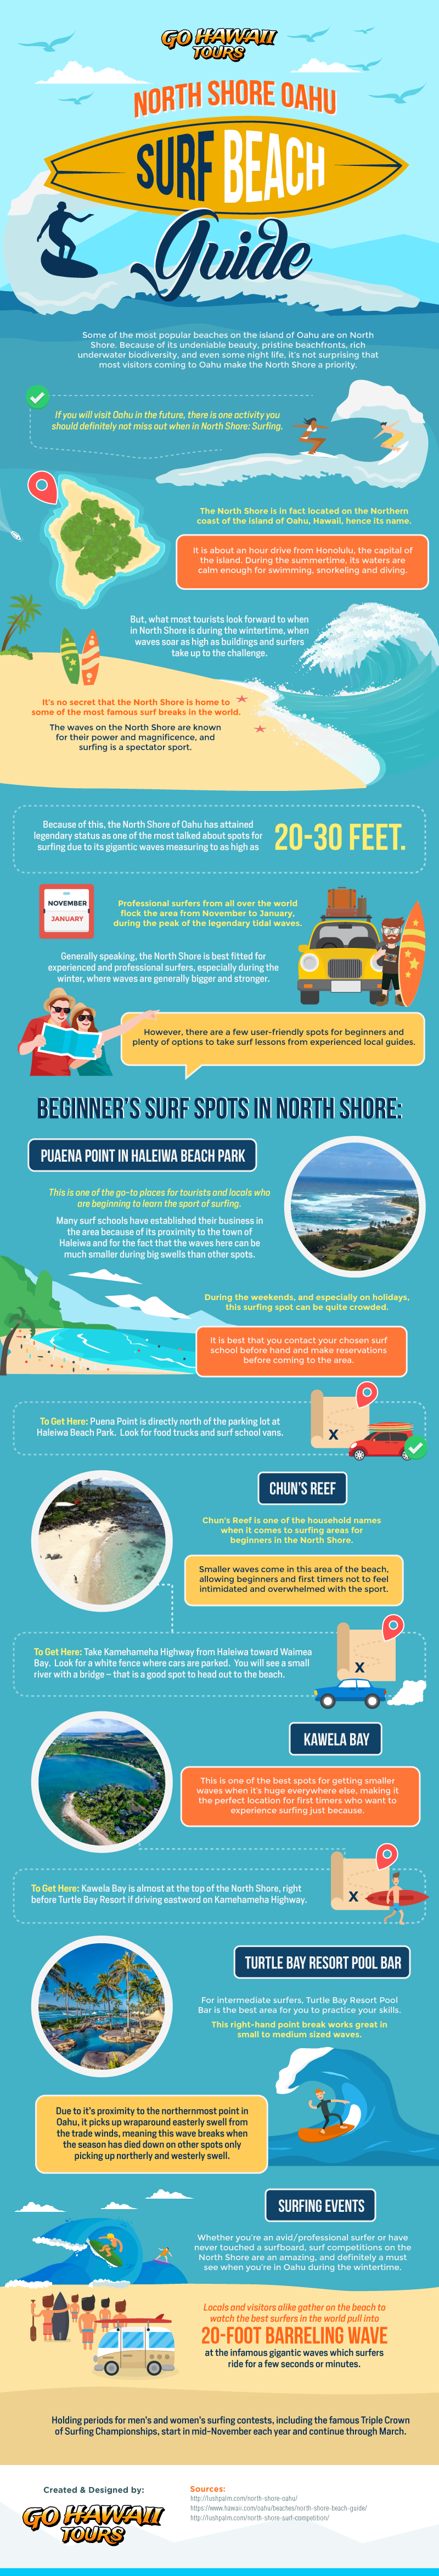 North Shore Oahu Surf Beach Guide Infographic Image 